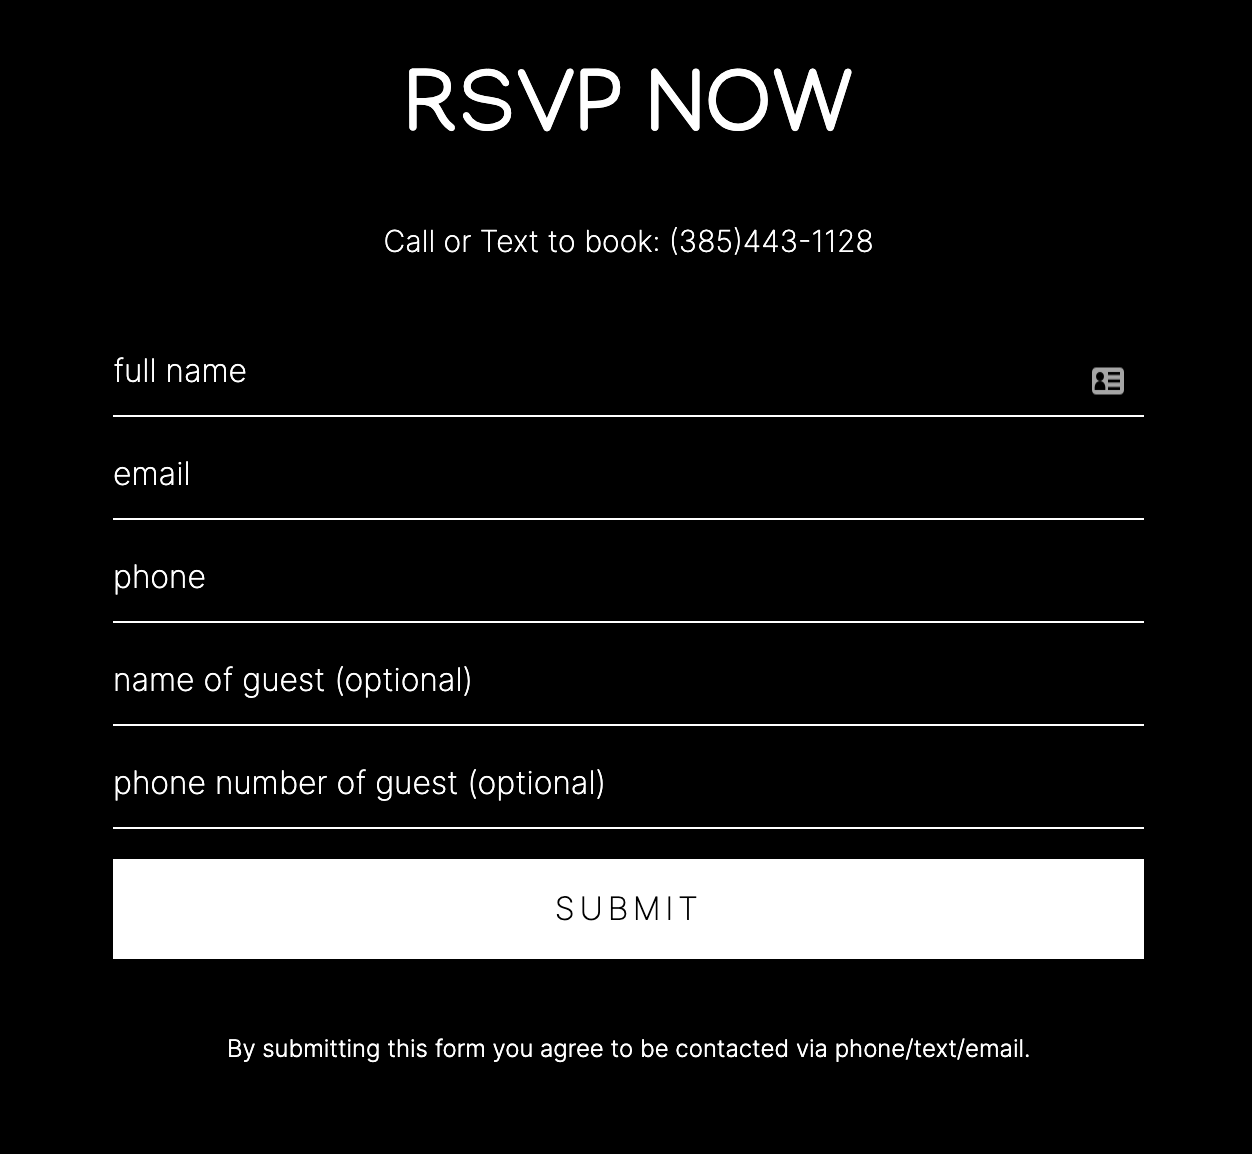 Example of a RSVP form on how to market a medspa event.